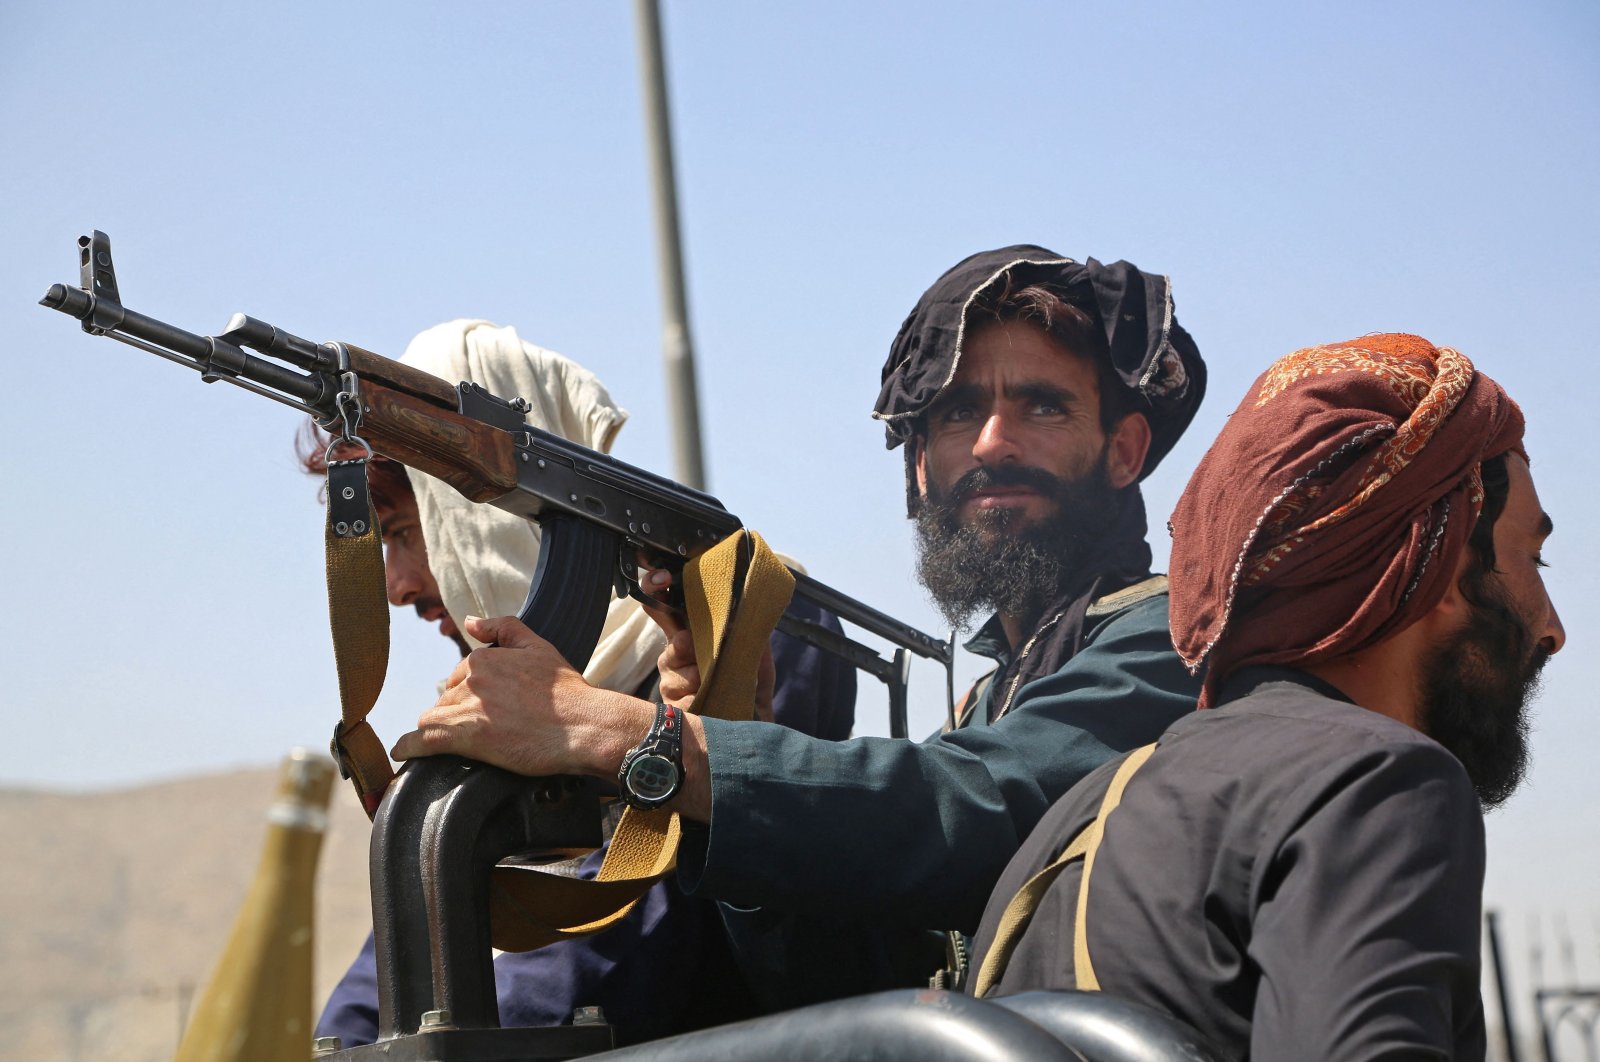 Taliban fighters stand guard in a vehicle along the roadside after a stunningly swift end to Afghanistan's 20-year war, as thousands of people mobbed the city's airport trying to flee the group's feared hardline brand of rule, Kabul, Afghanistan, Aug. 16, 2021. (AFP Photo)